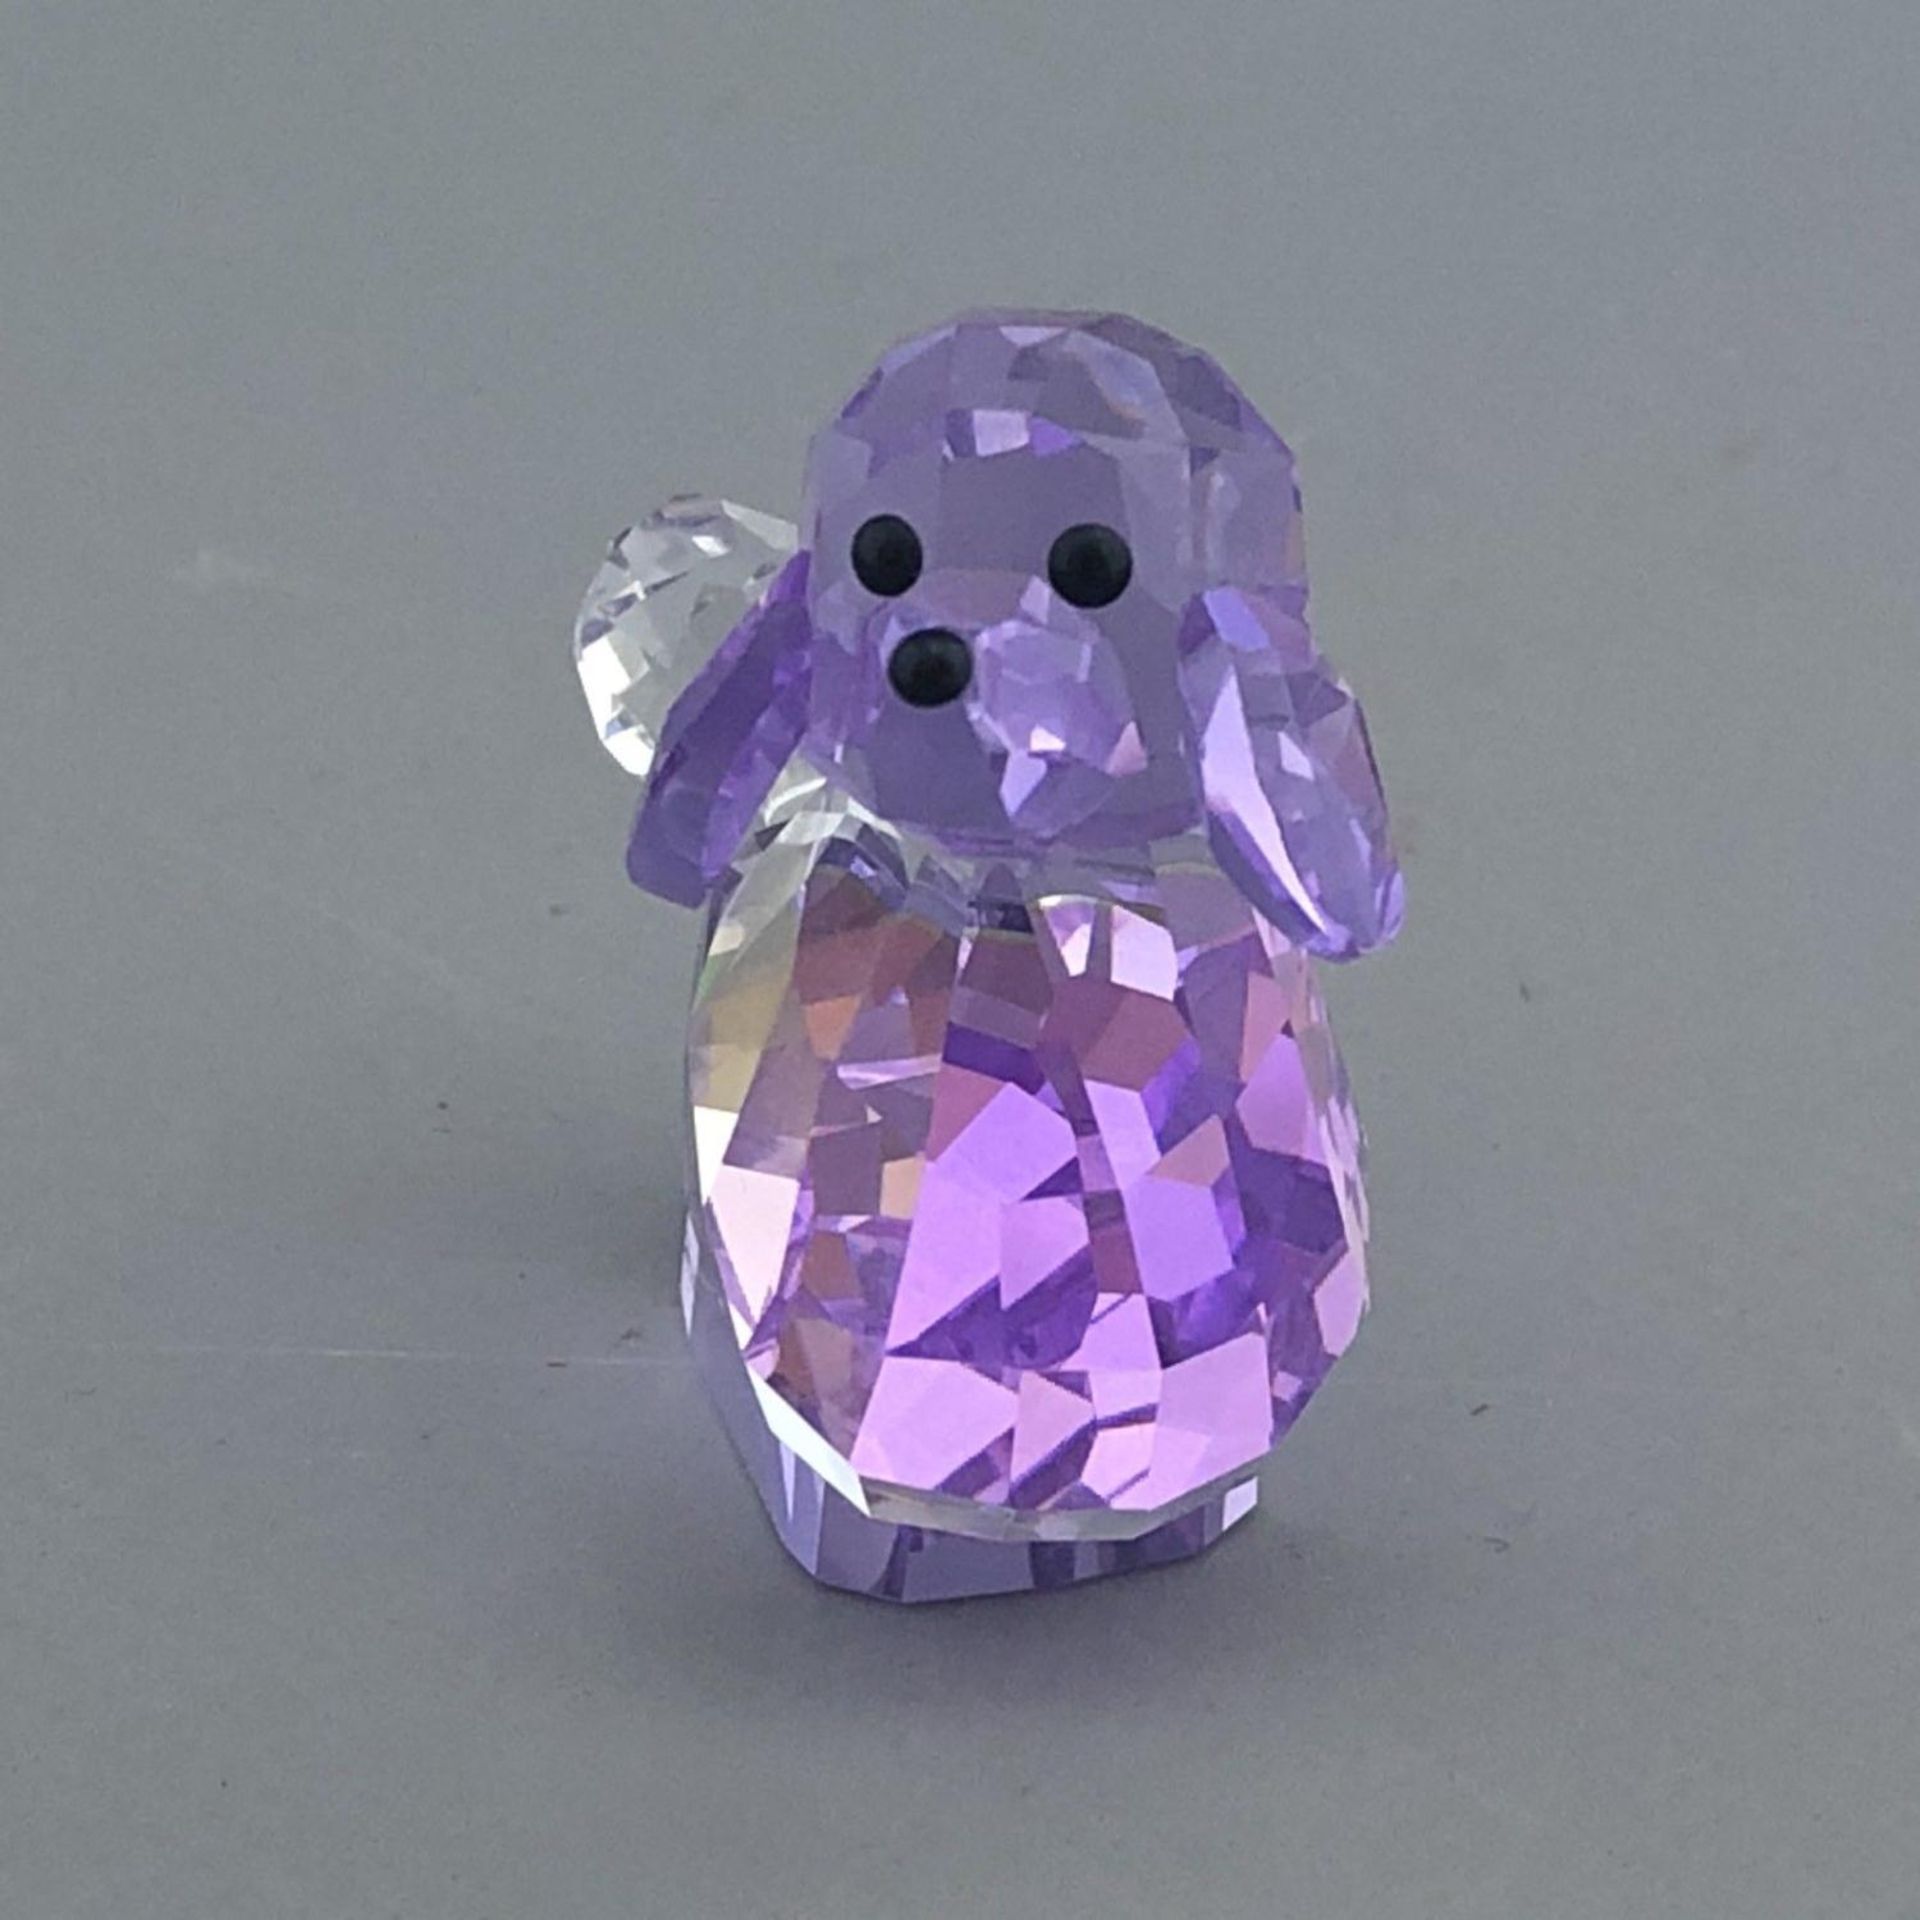 Small Poodle Puppy Crystal Figurine by Swarovski Lovlots Gang of Dogs Violetta - Image 2 of 5